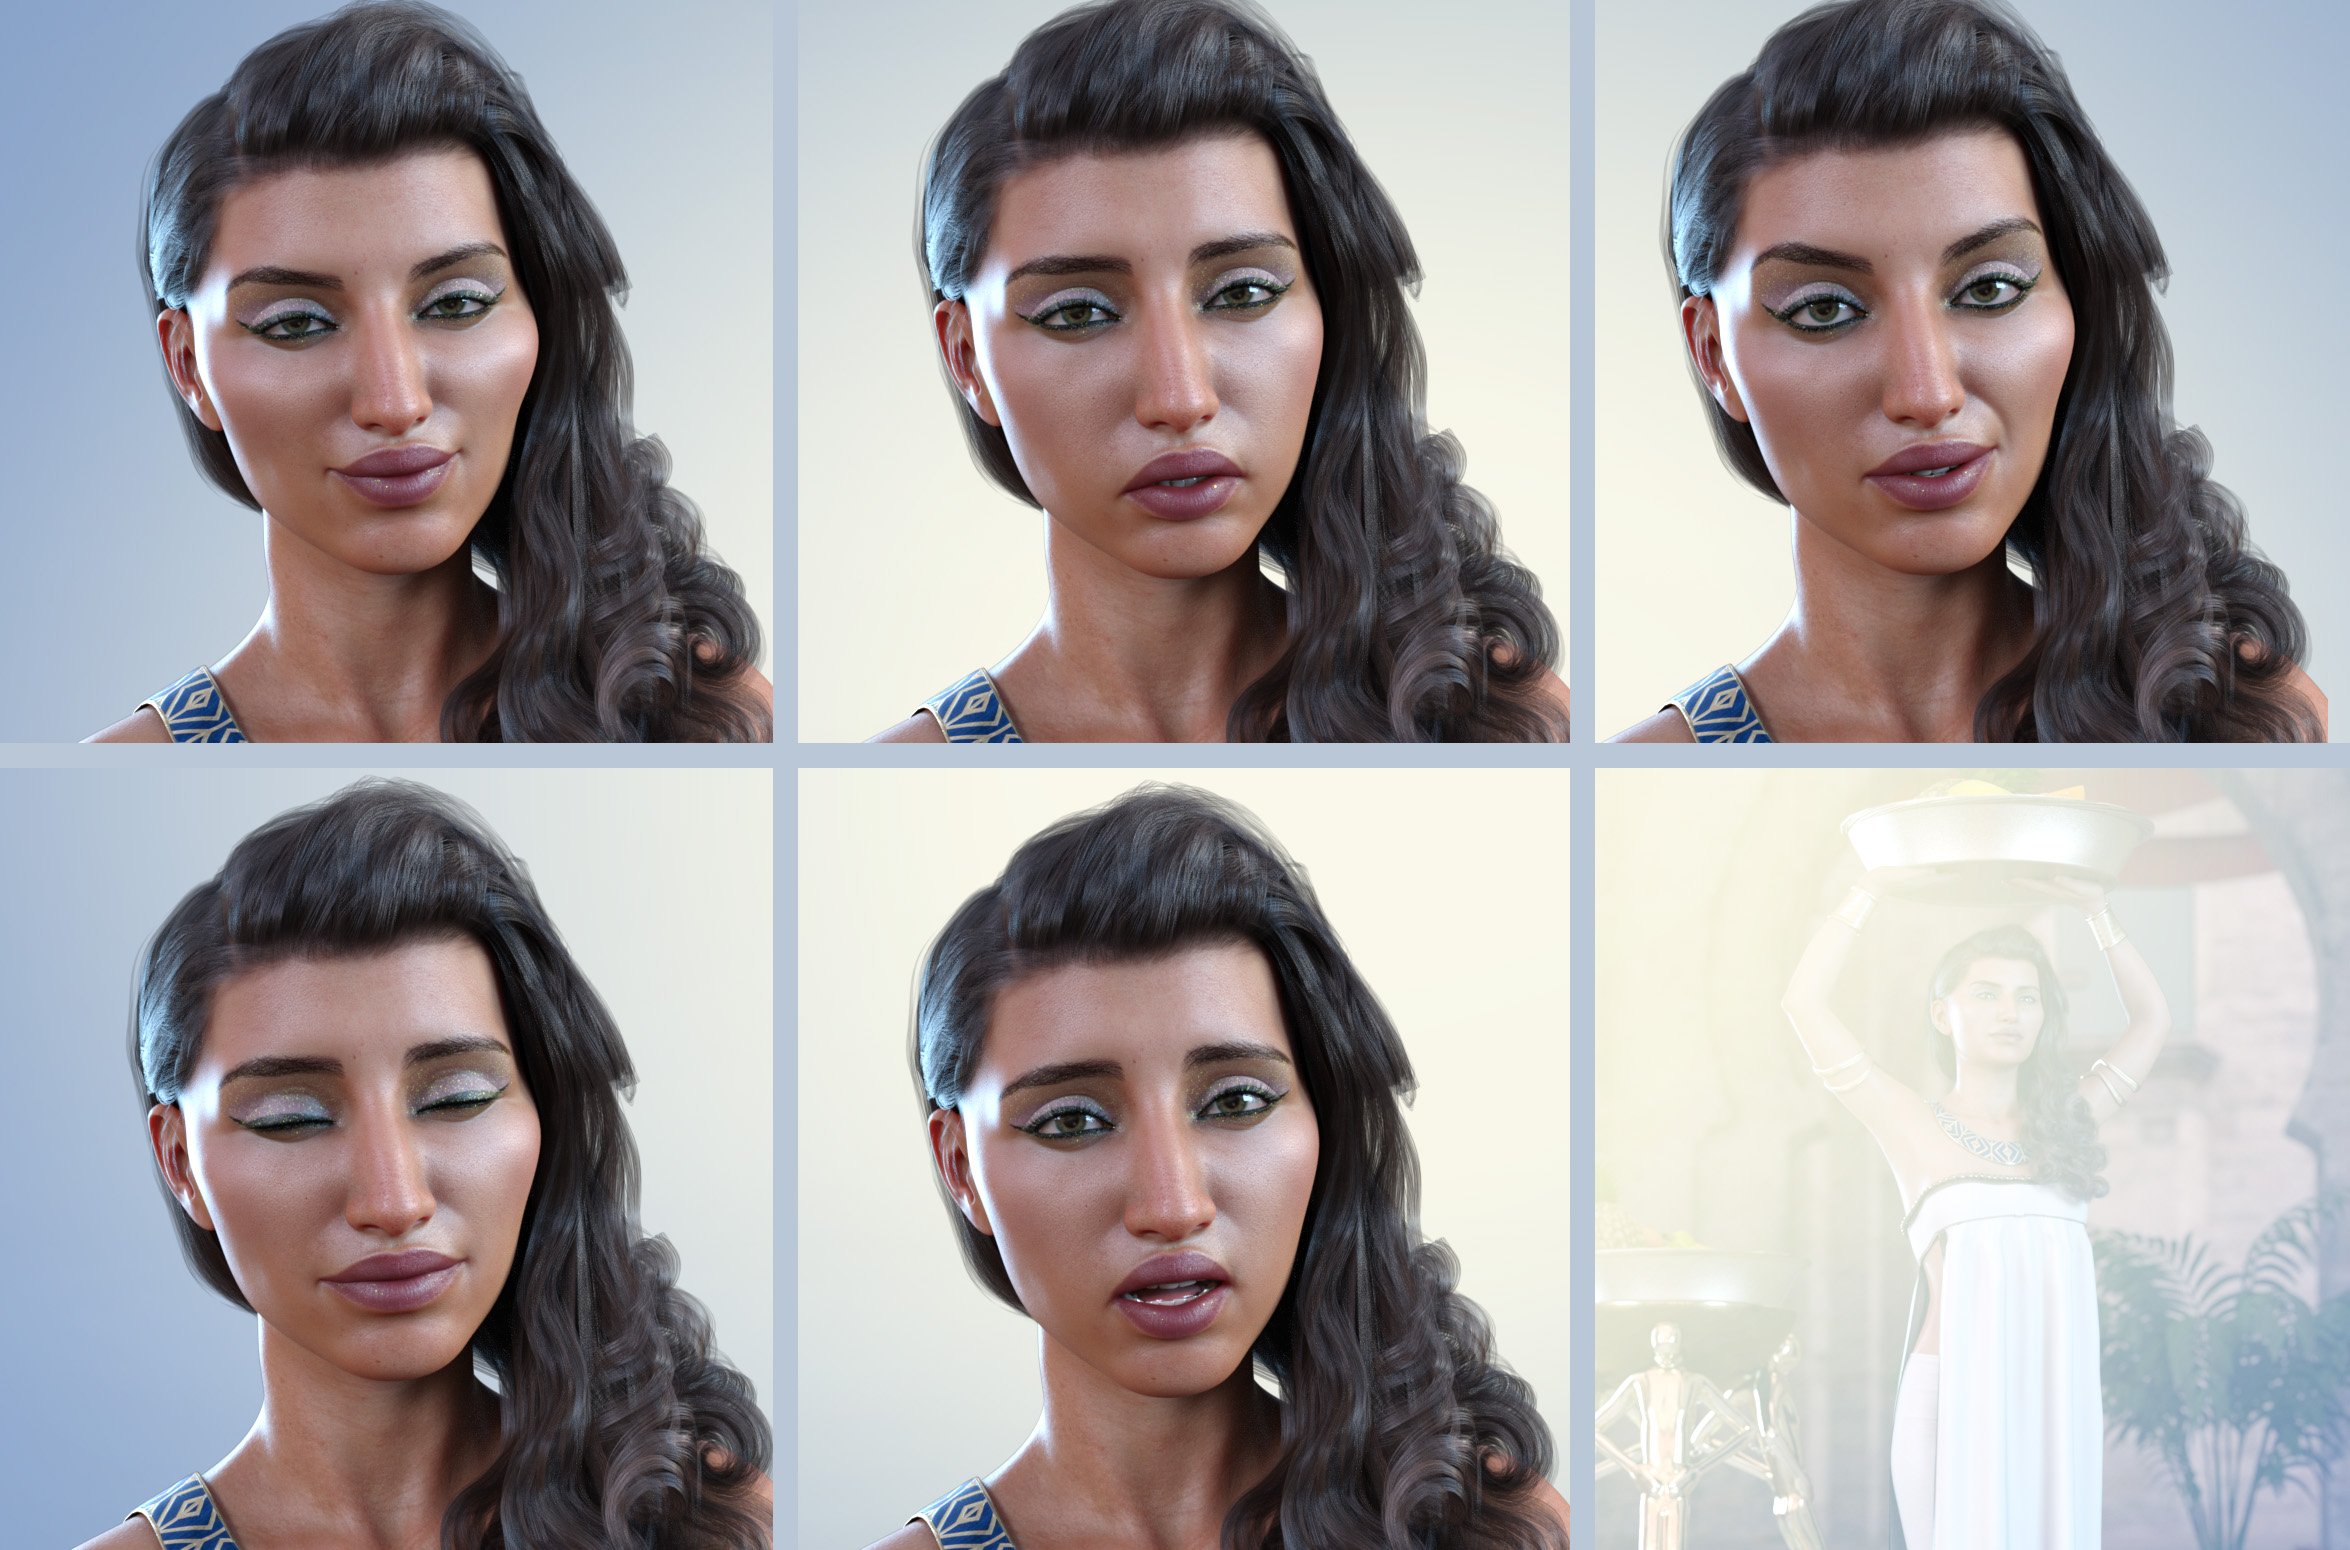 Z Royal Handmaiden Poses and Expressions for Khemsit 8 by: Zeddicuss, 3D Models by Daz 3D